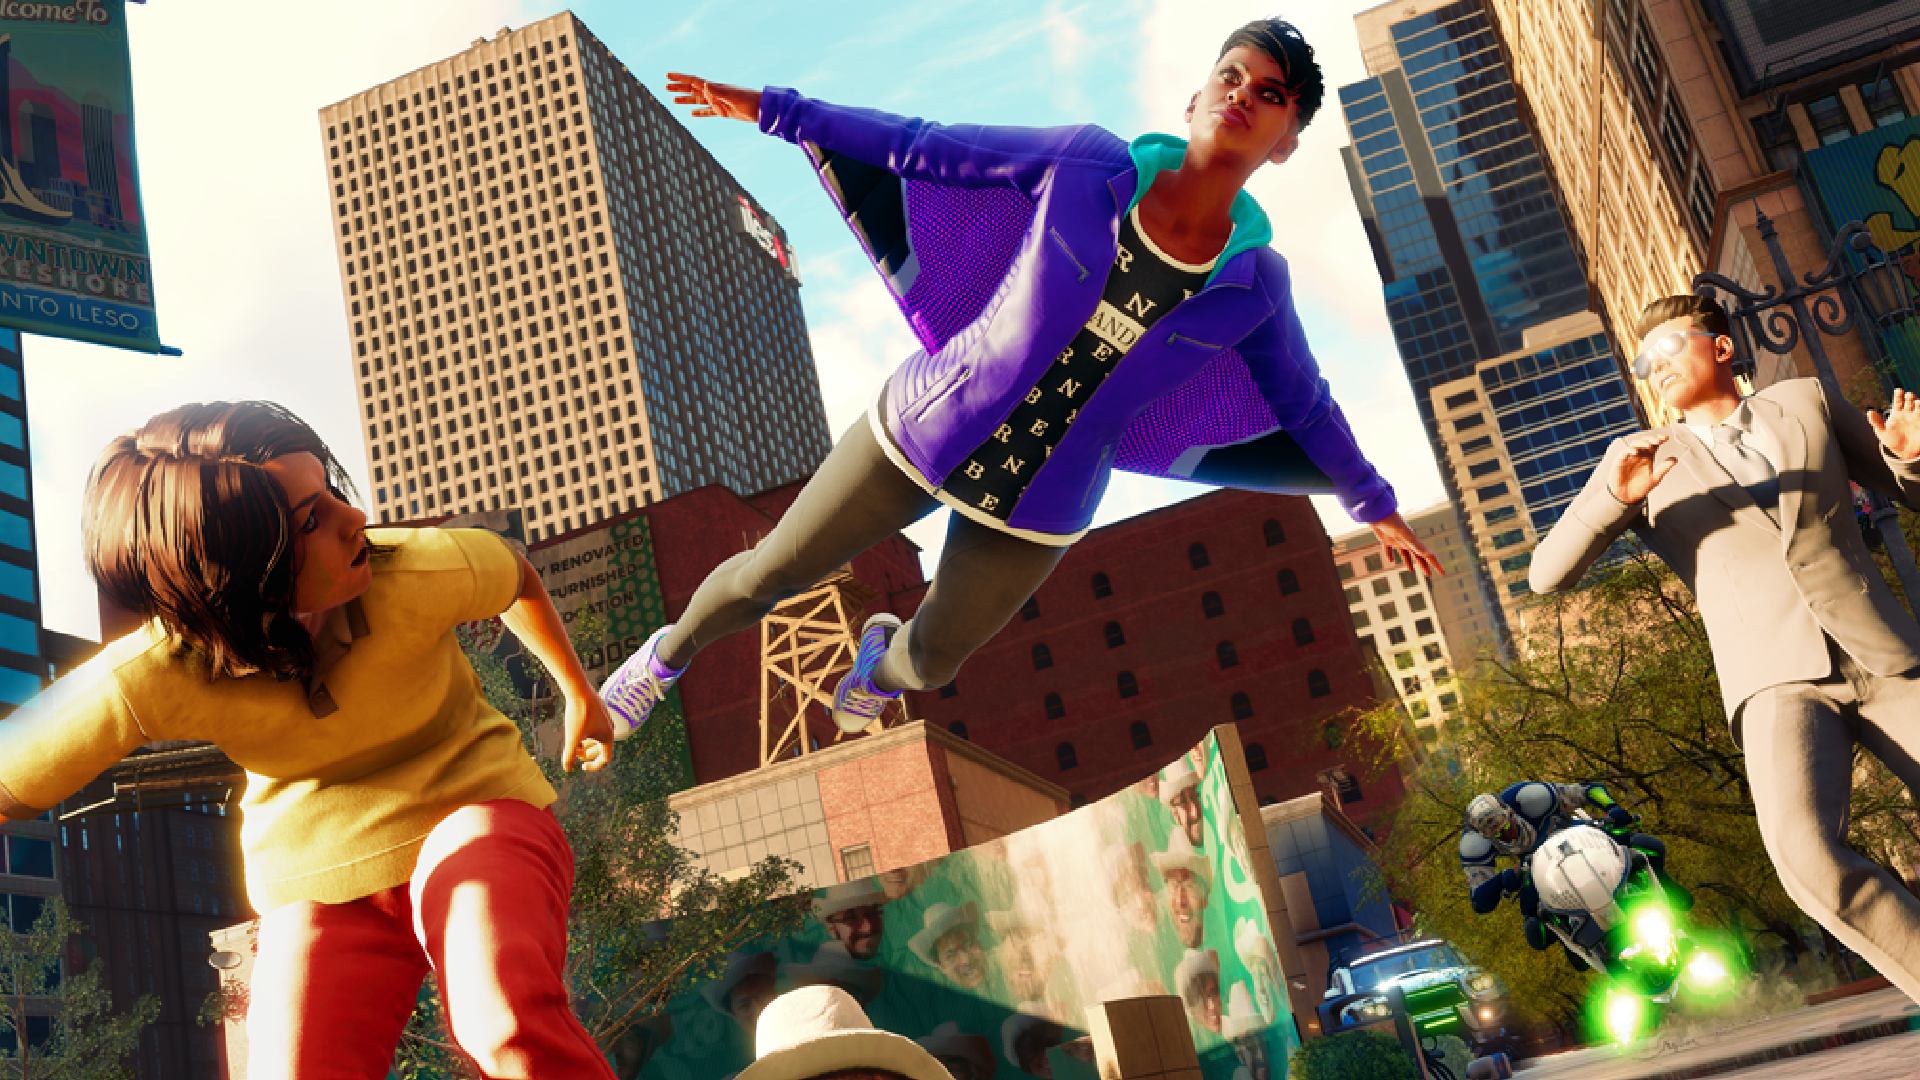 Saints Row Review: The Boss can be seen wingsuitting